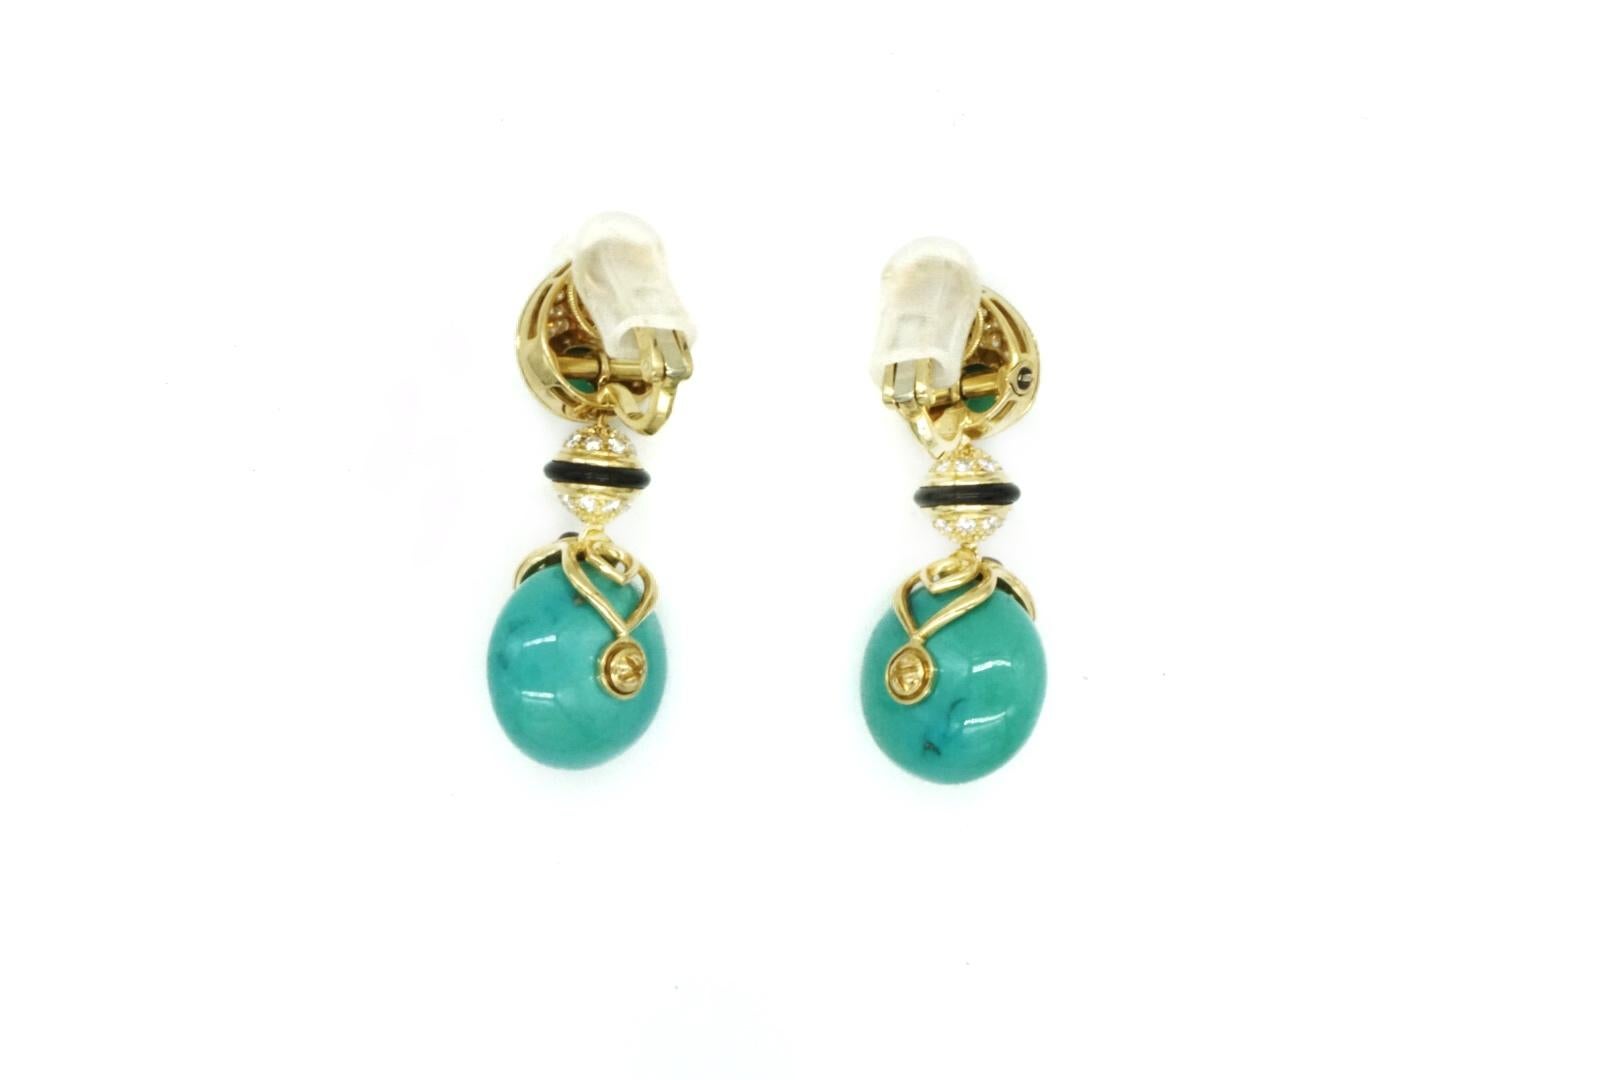 Marina B “Pneum” Ear-pendants in 18kt Yellow Gold with diamonds, crysophrase, onyx and turquoise. Made in Italy, circa 1980